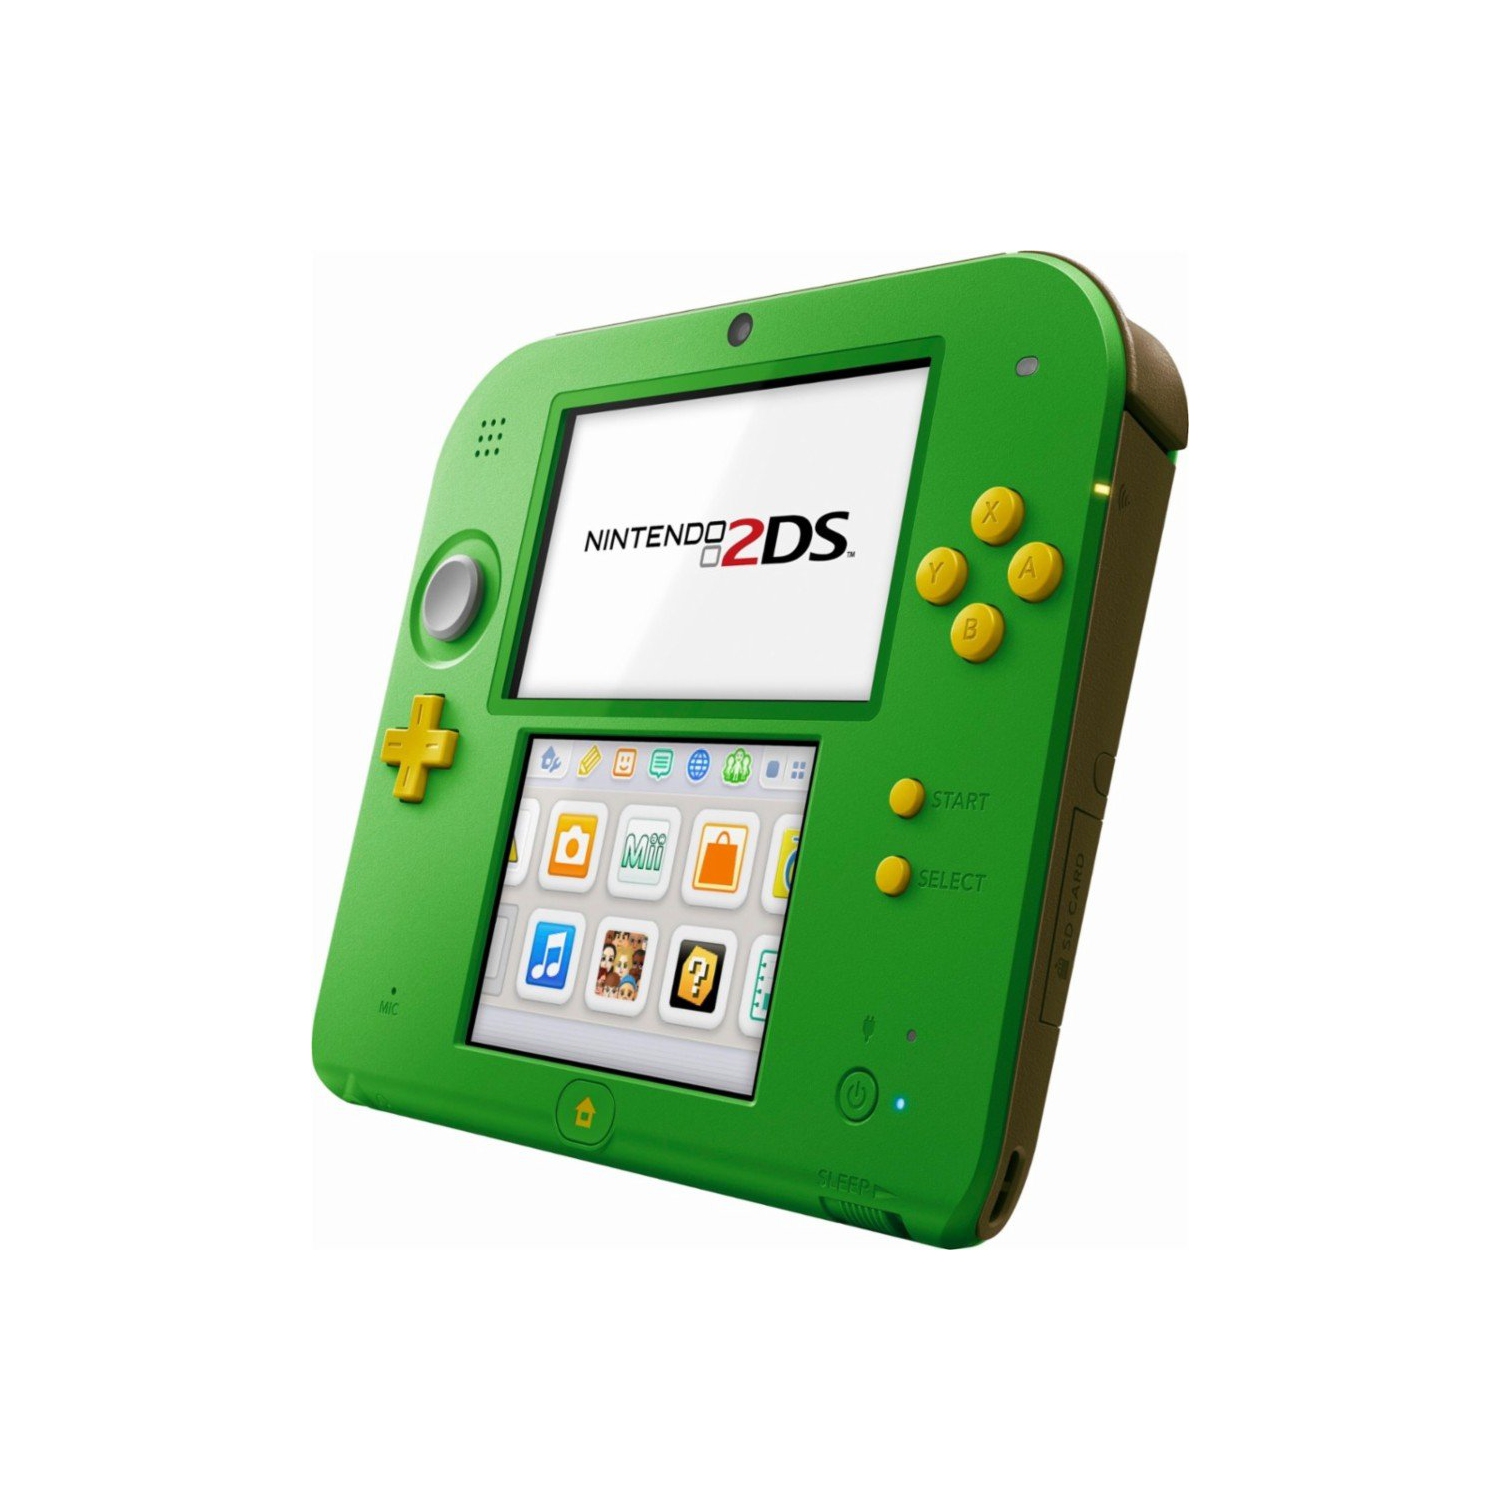 Nintendo 2DS Console - Kokiri Green Link Edition - Includes The 